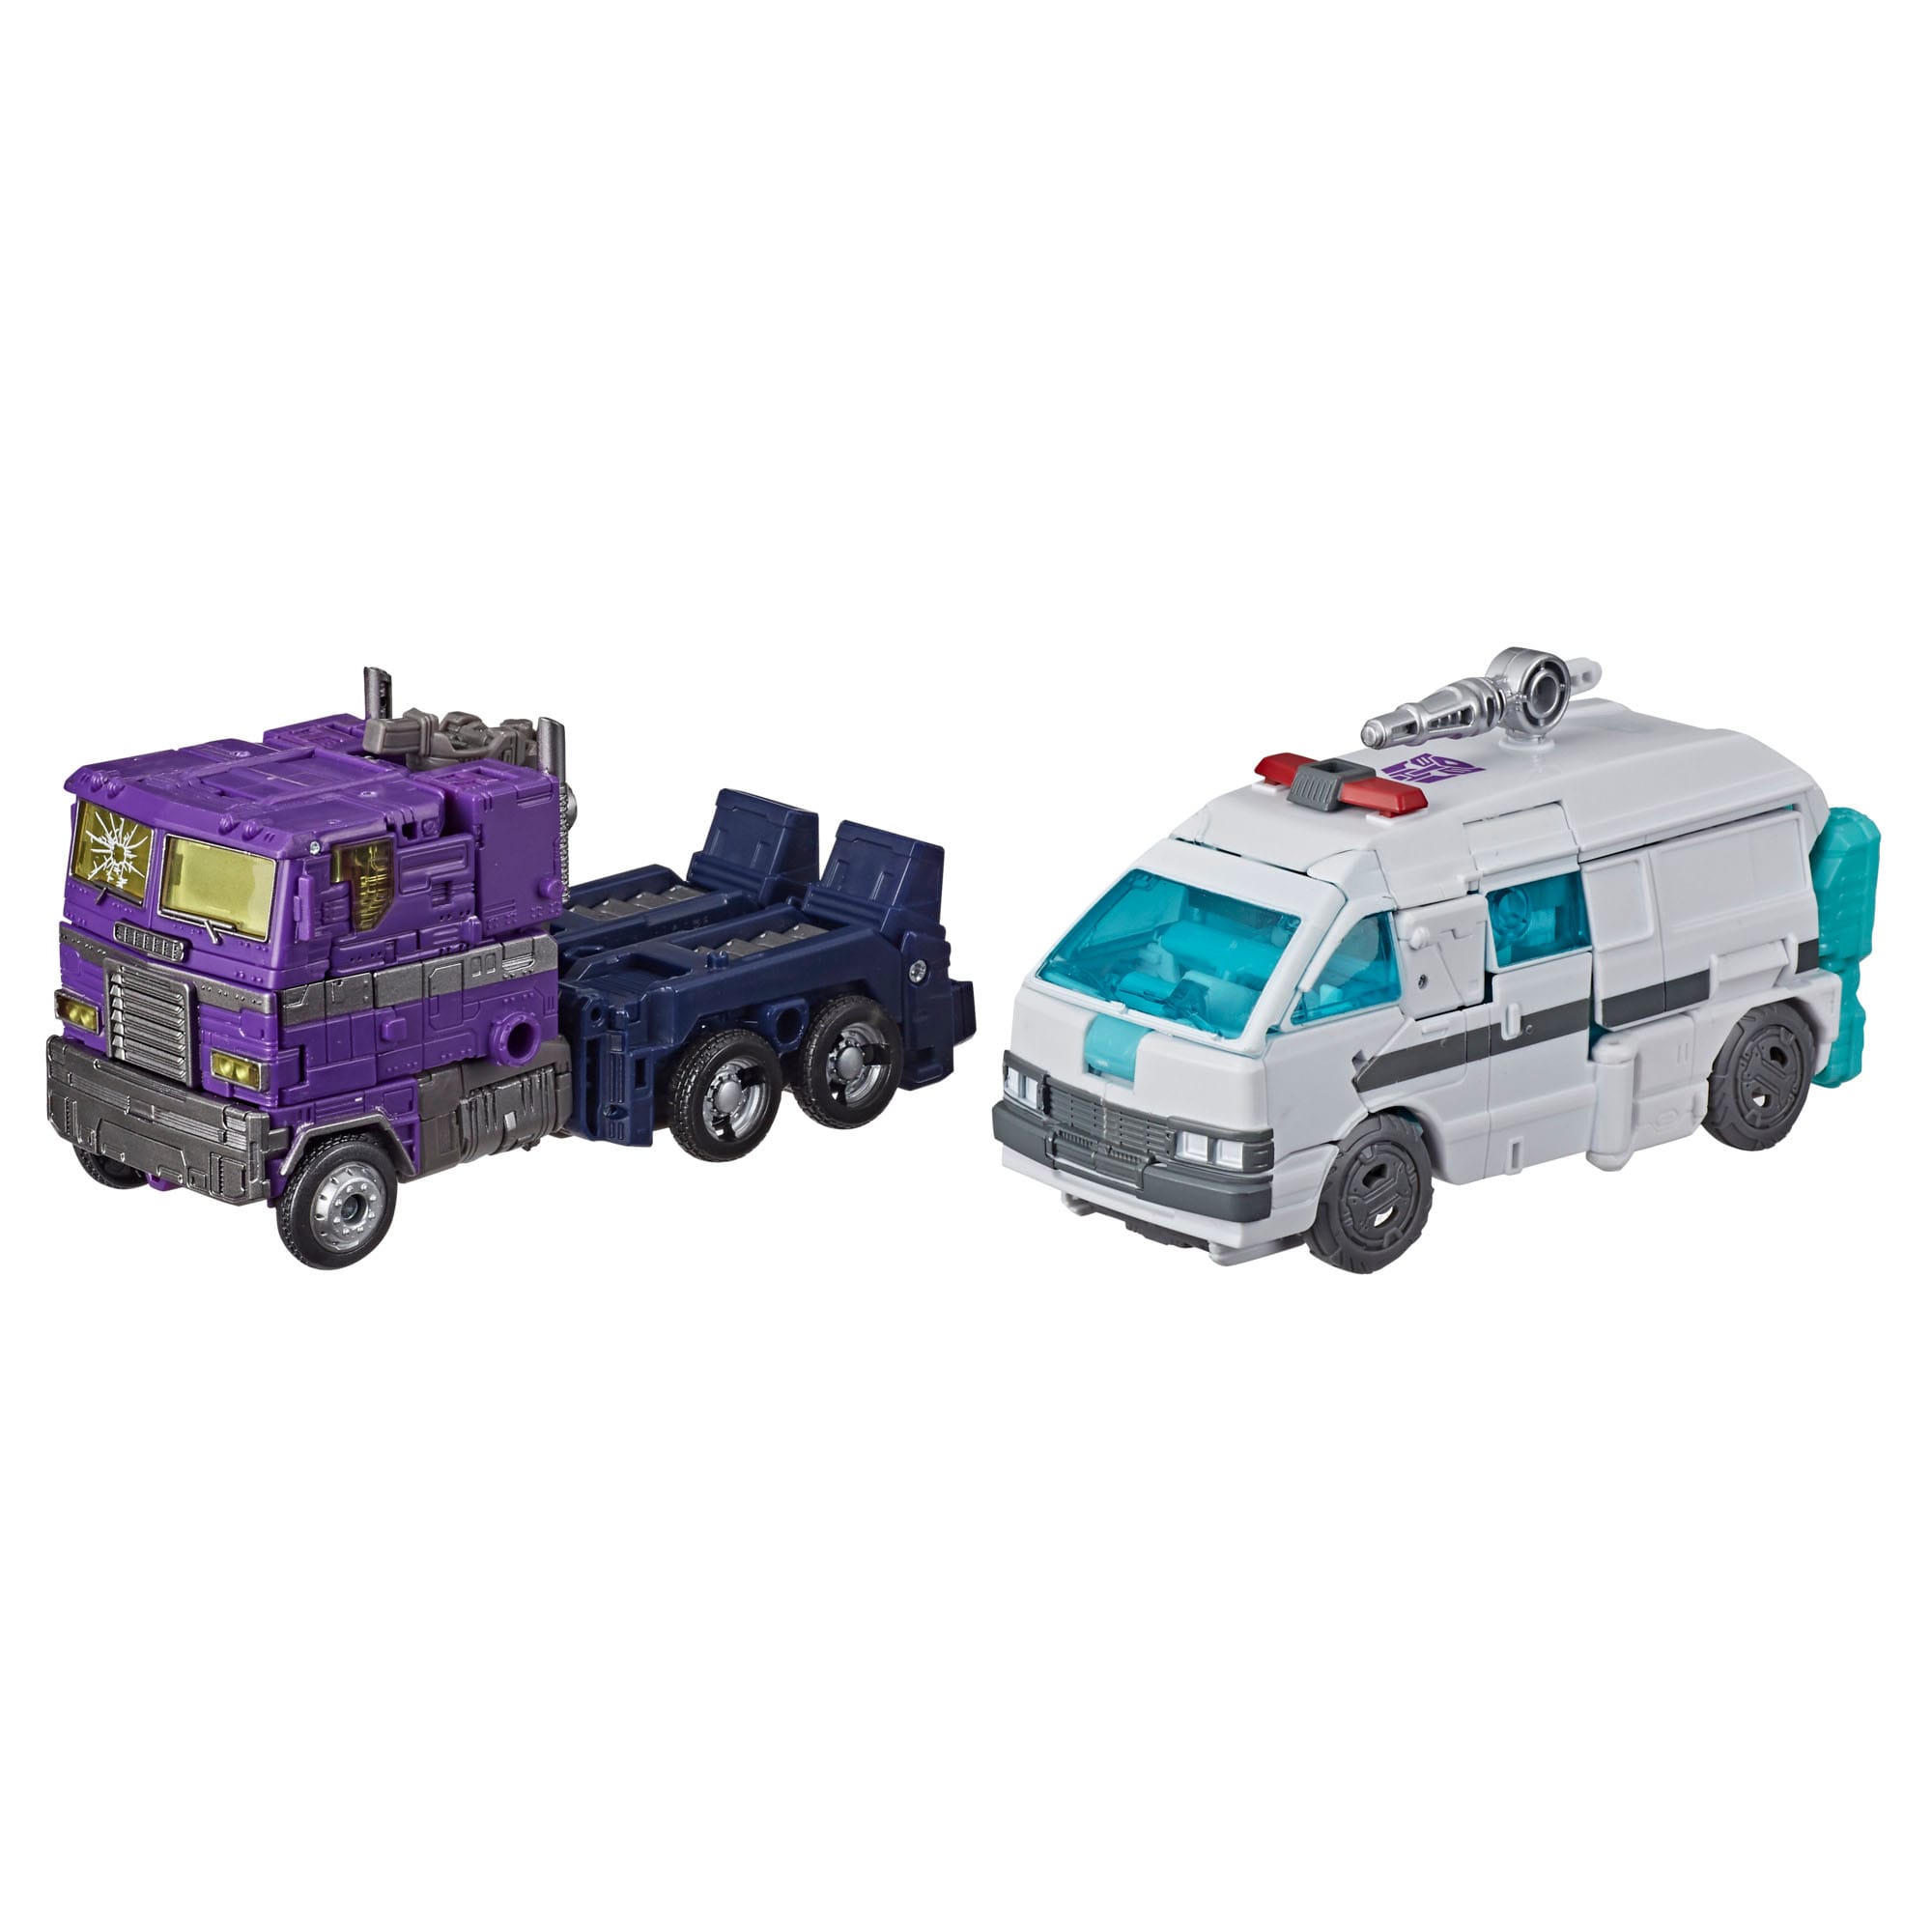 Transformers Generations Selects Shattered Glass Optimus Prime Ratchet 2 Pack 2